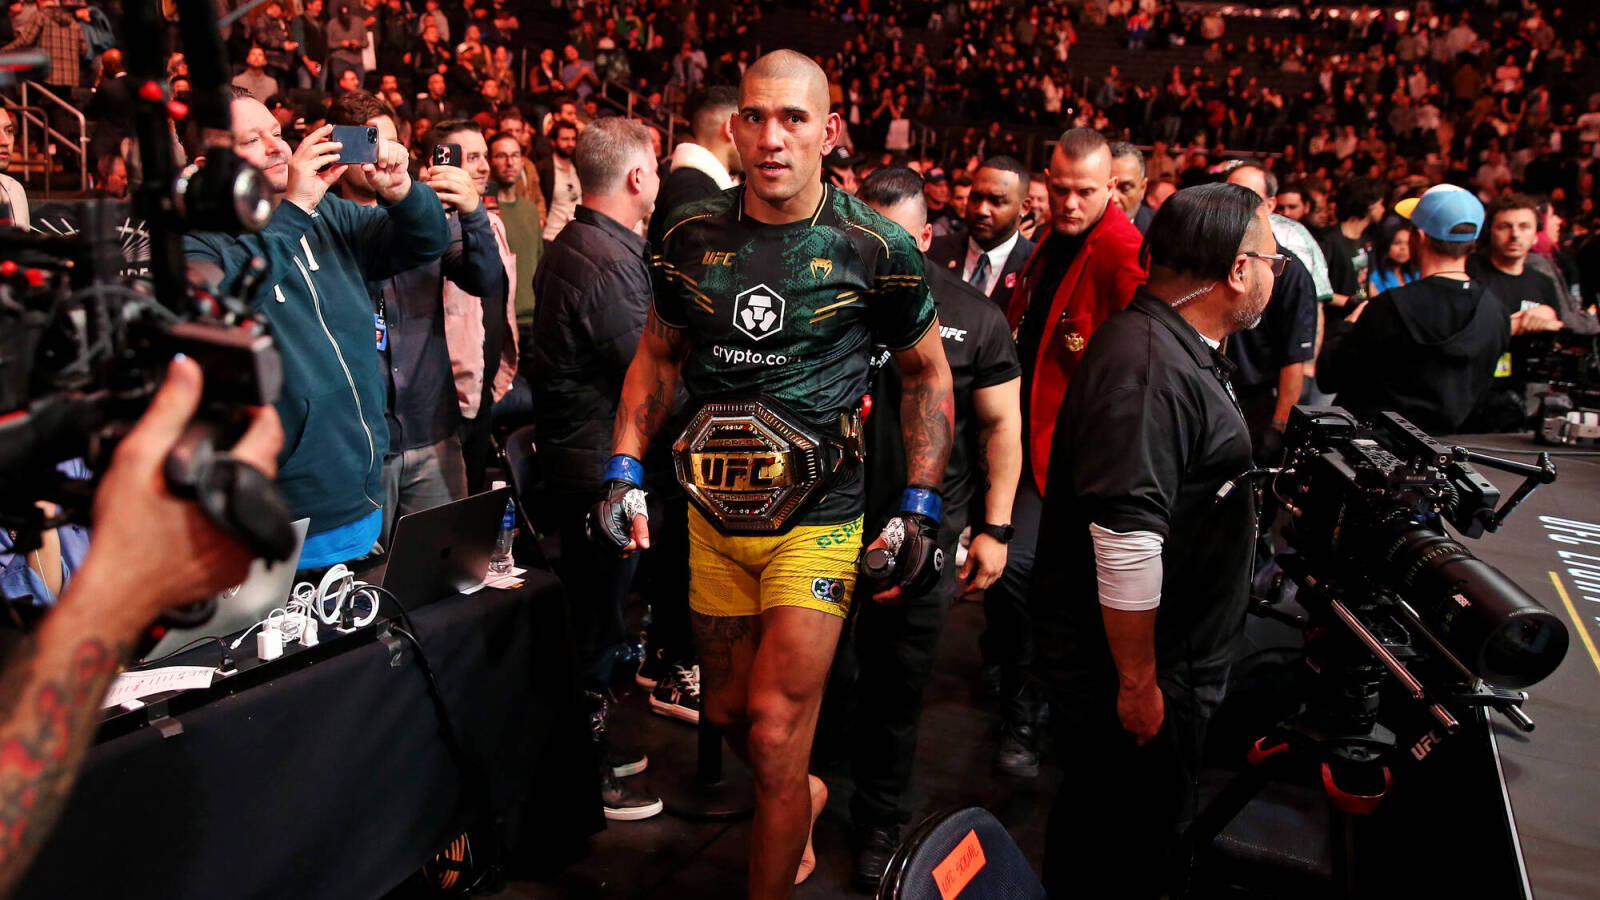 Alex Pereira will look to create another record by fighting 2 times in 21 days